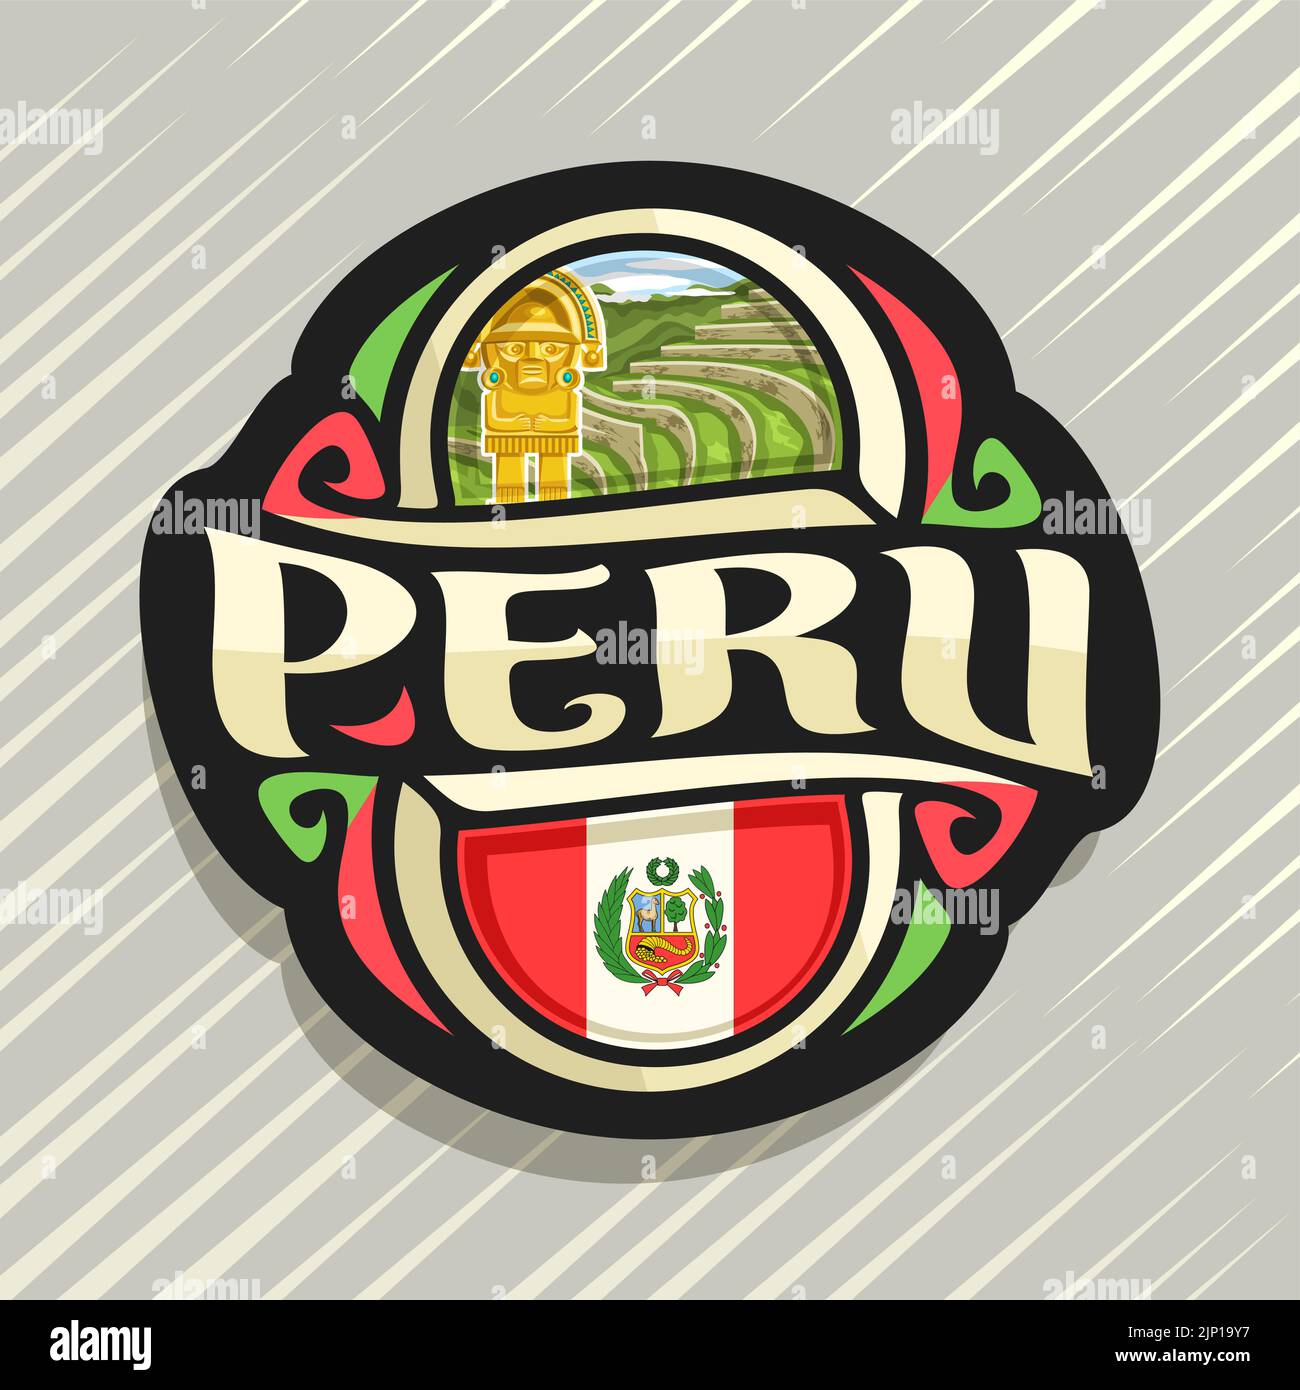 Vector logo for Peru country, fridge magnet with peruvian state flag, original brush typeface for word peru and national peruvian symbols - ancient in Stock Vector